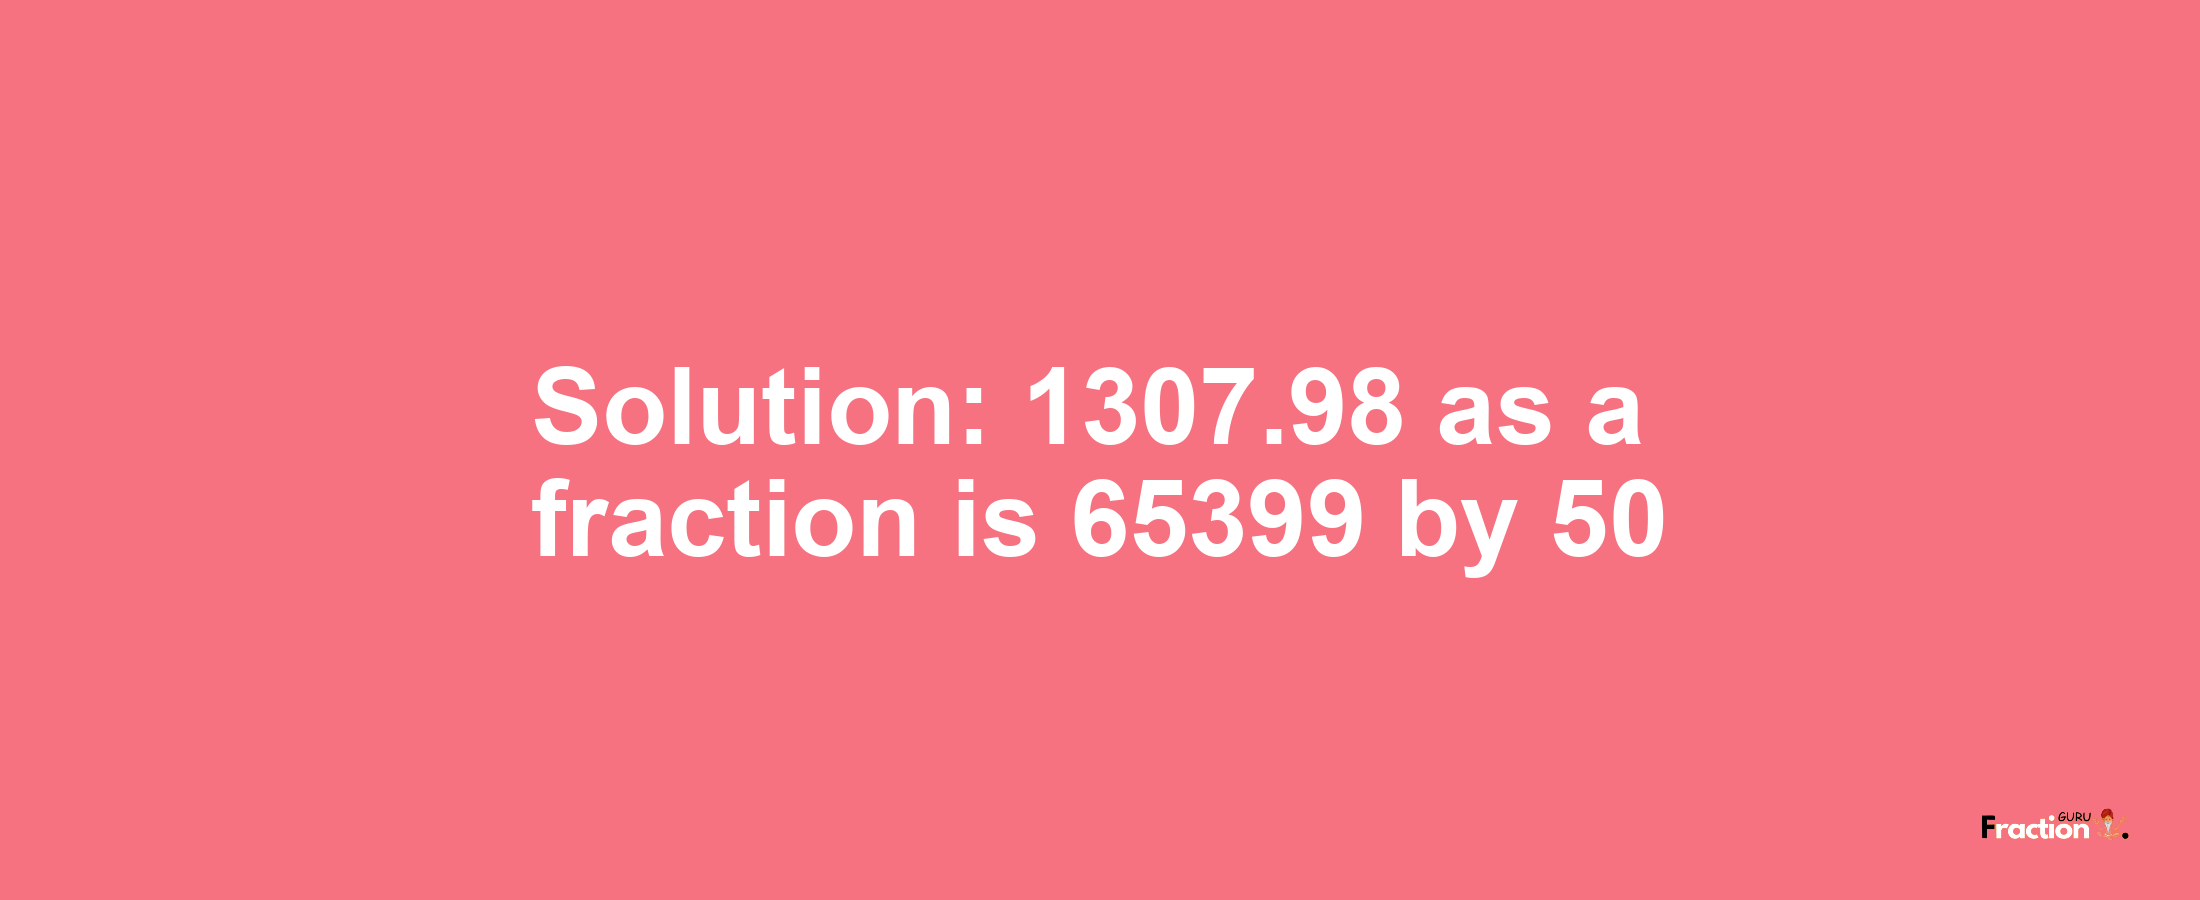 Solution:1307.98 as a fraction is 65399/50